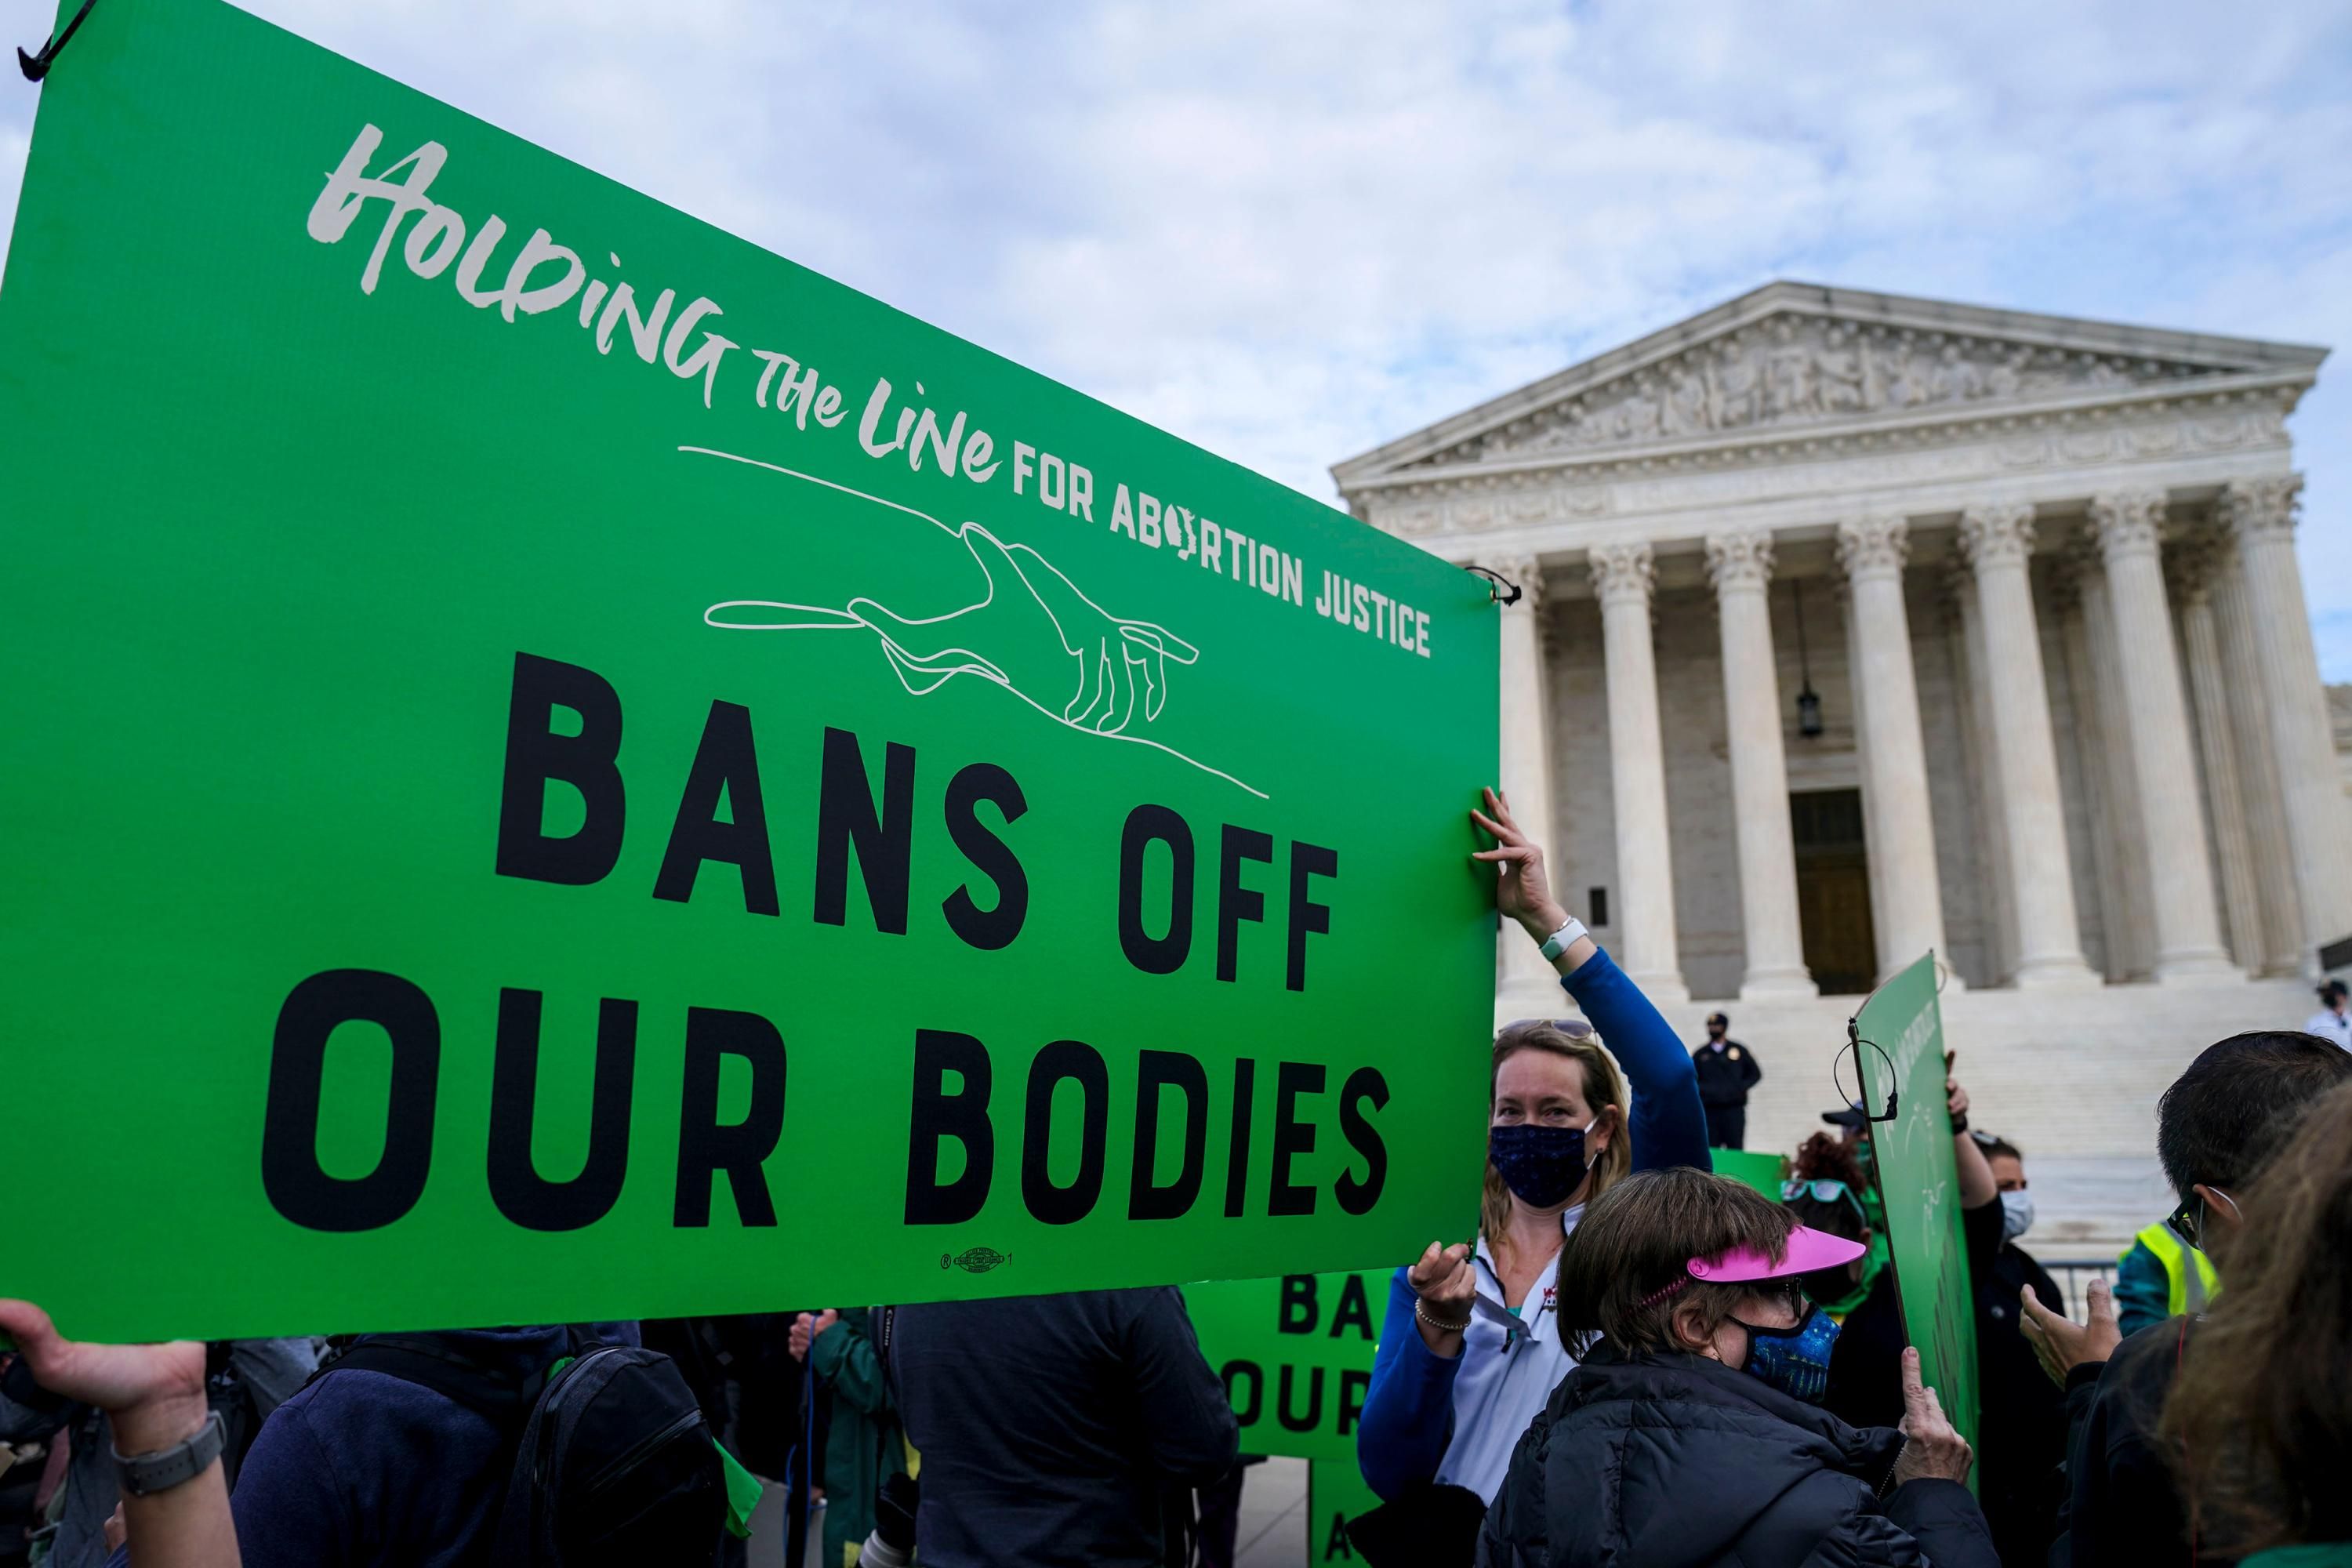 A sign reading "Bans off our bodies" at a pro-choice rally